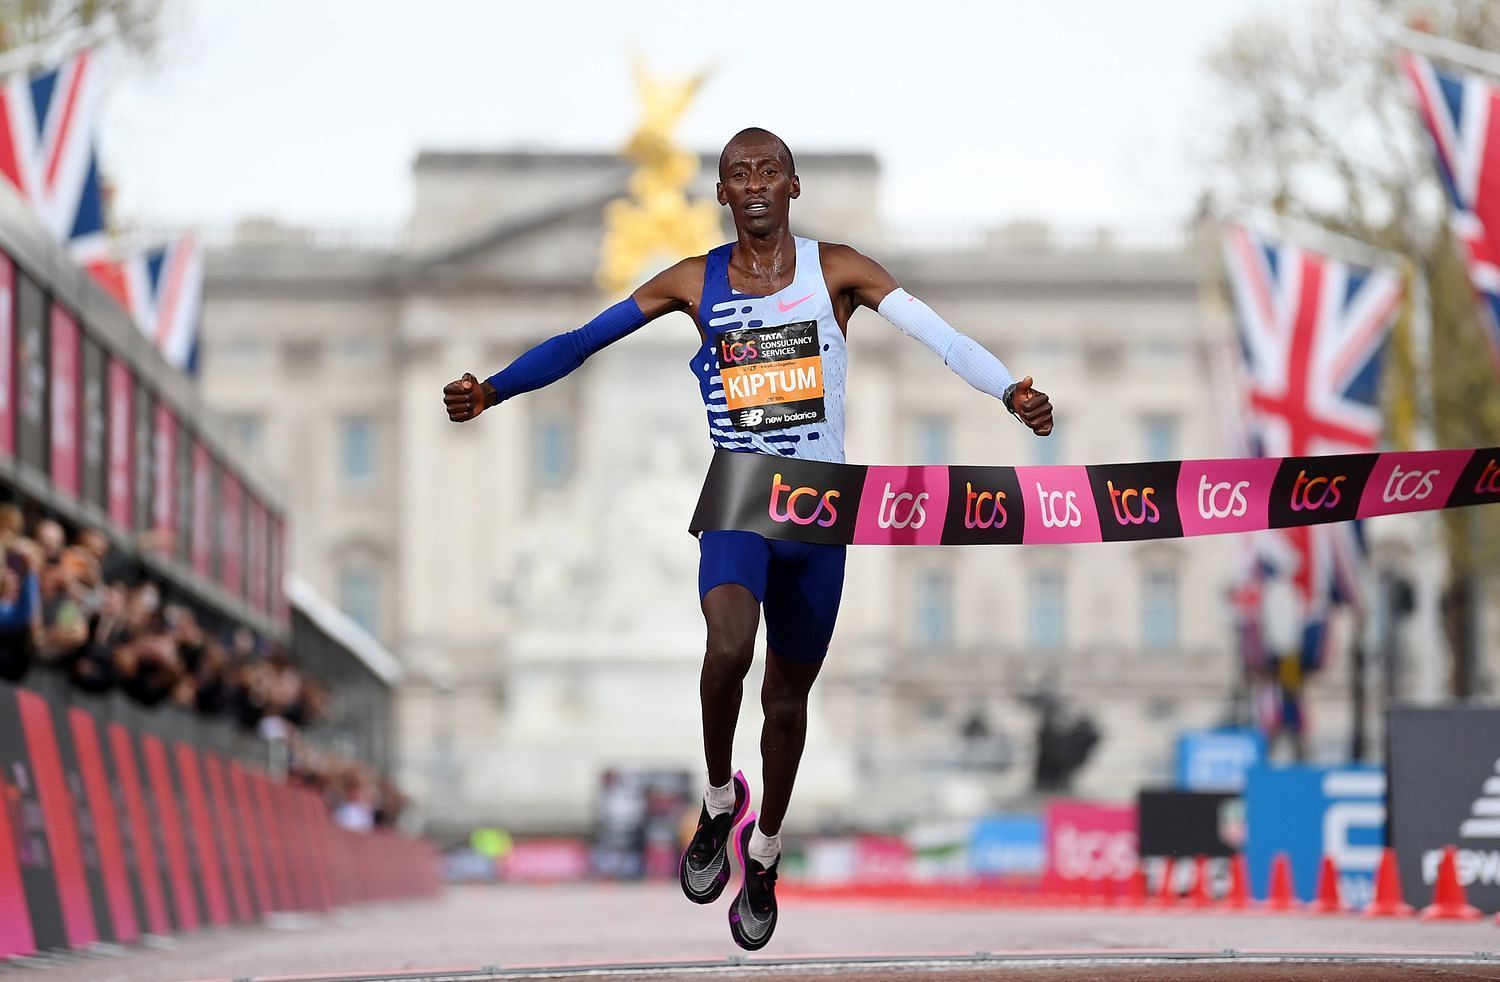 Social media users mourn the passing away of Kelvin Kiptum as the marathon runner passes away at the age of 24. (Image via Getty Images)